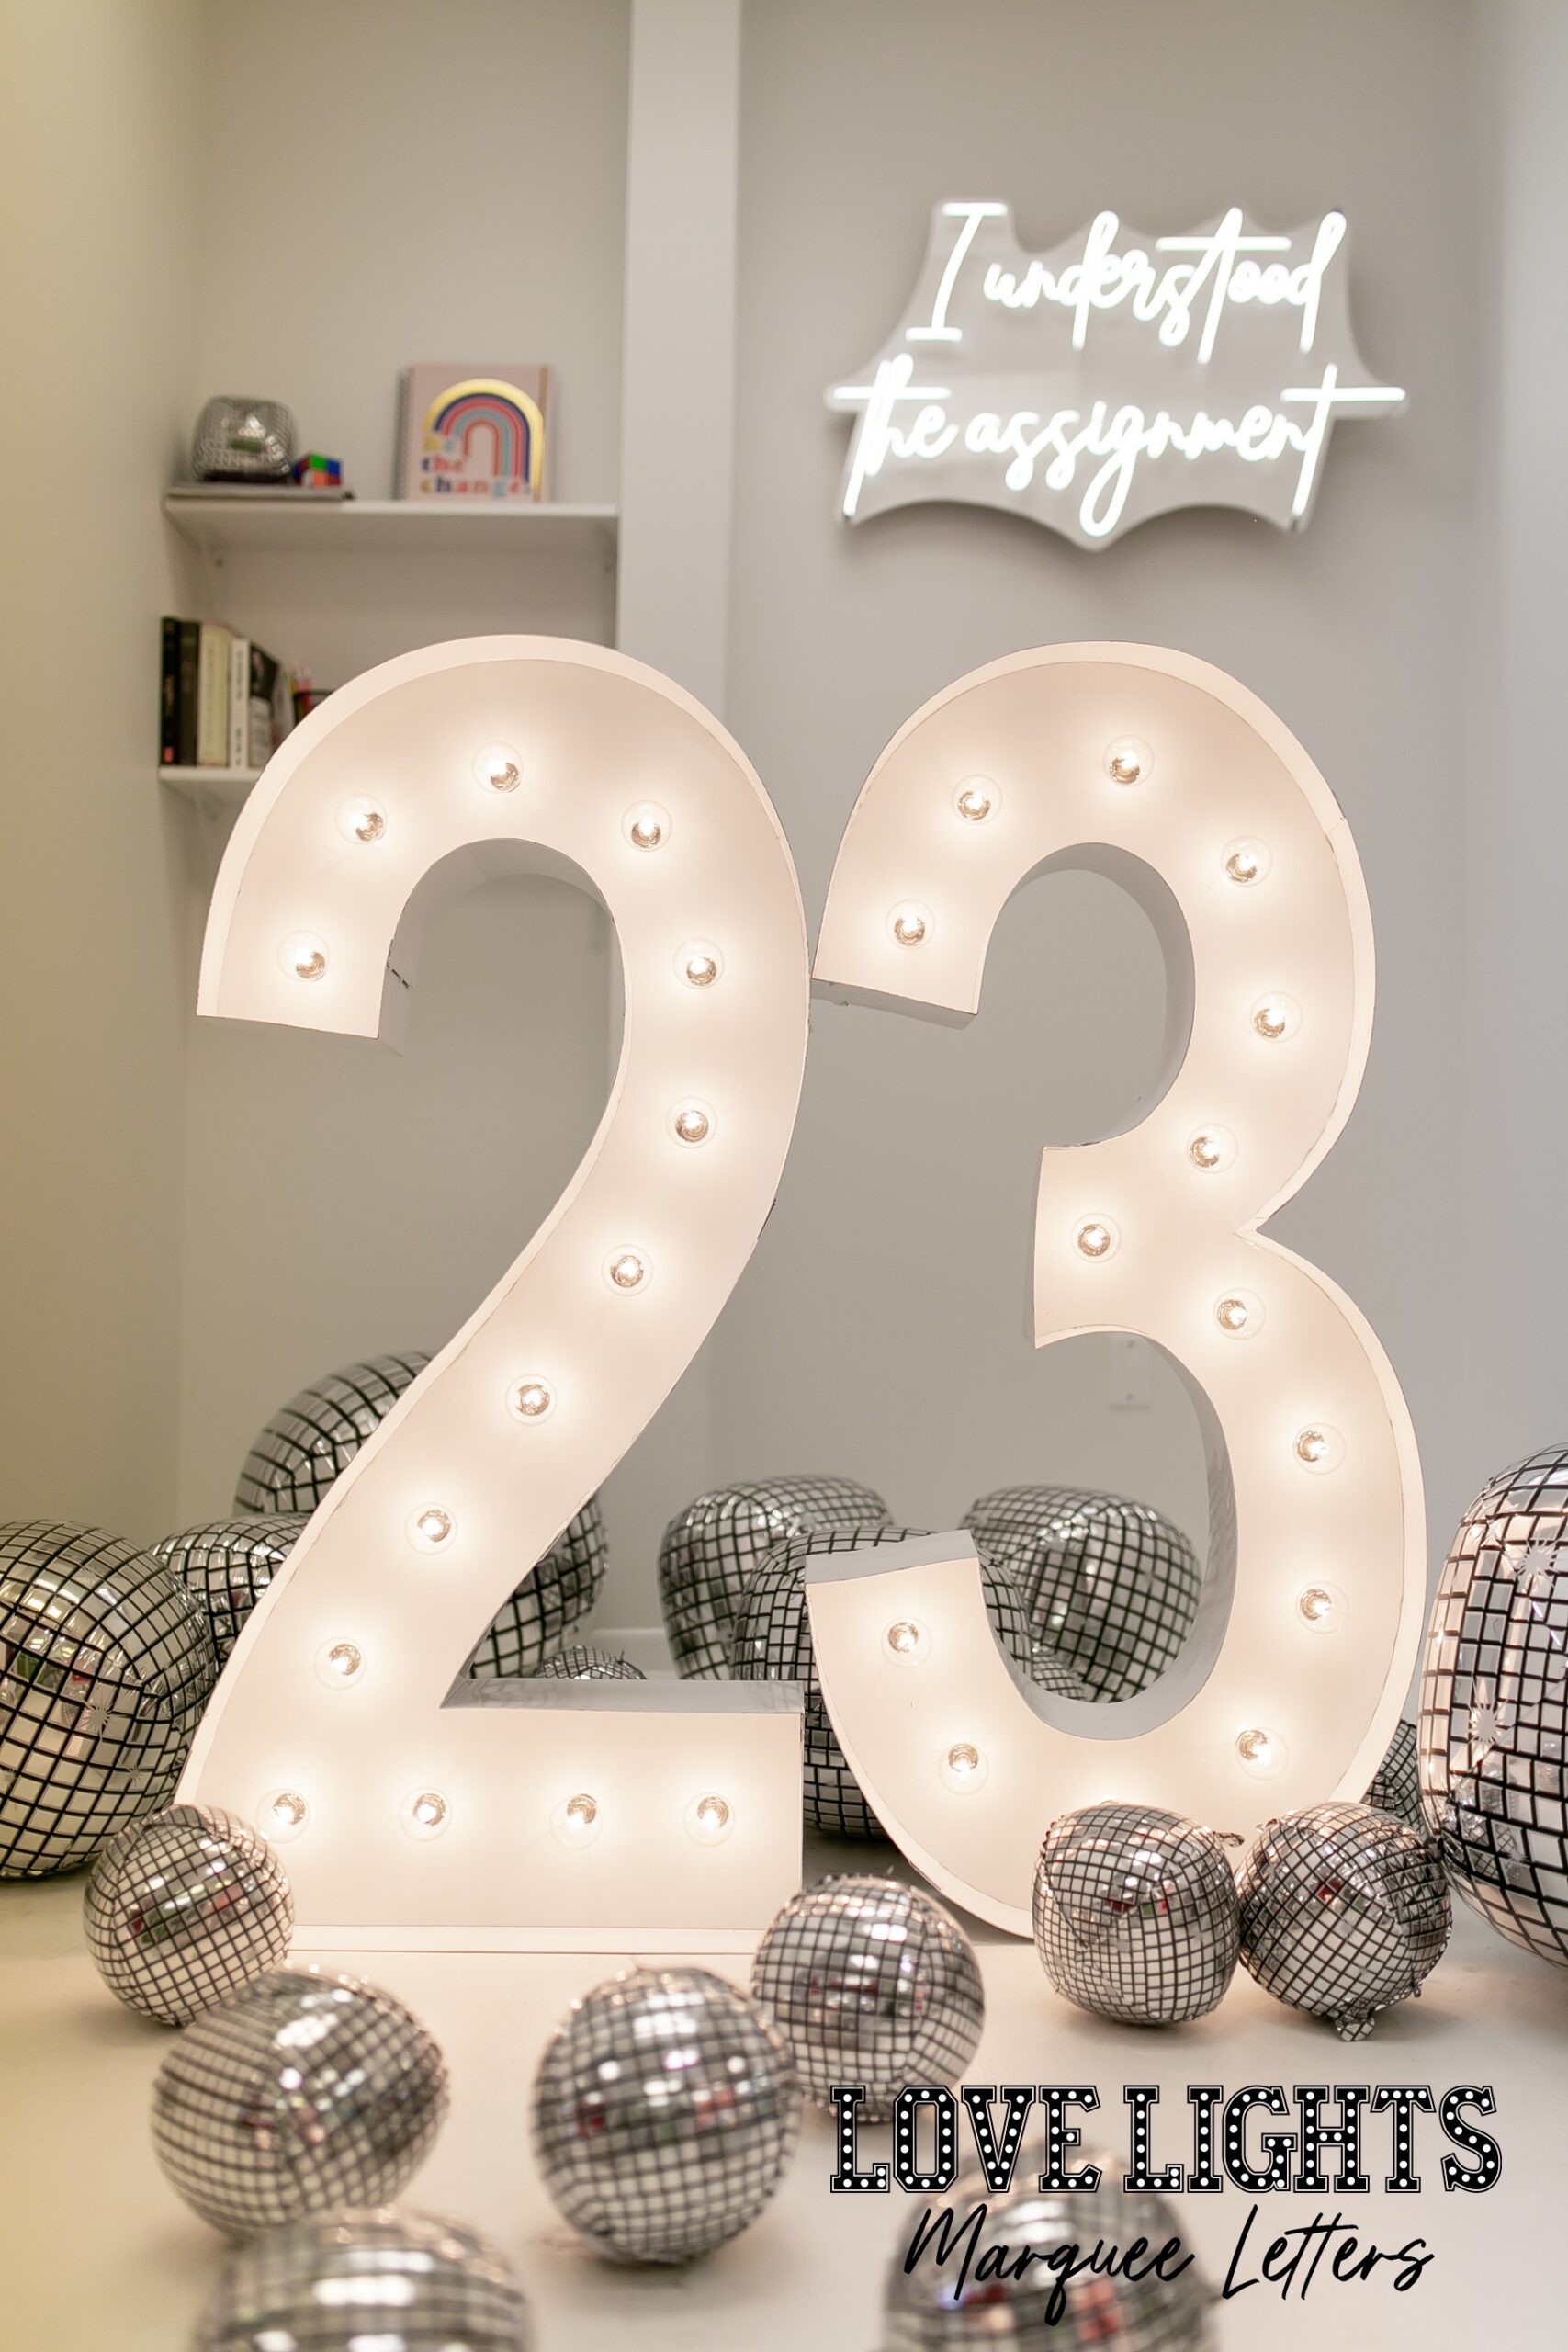 23 in lit marquee letters in a room with balloons